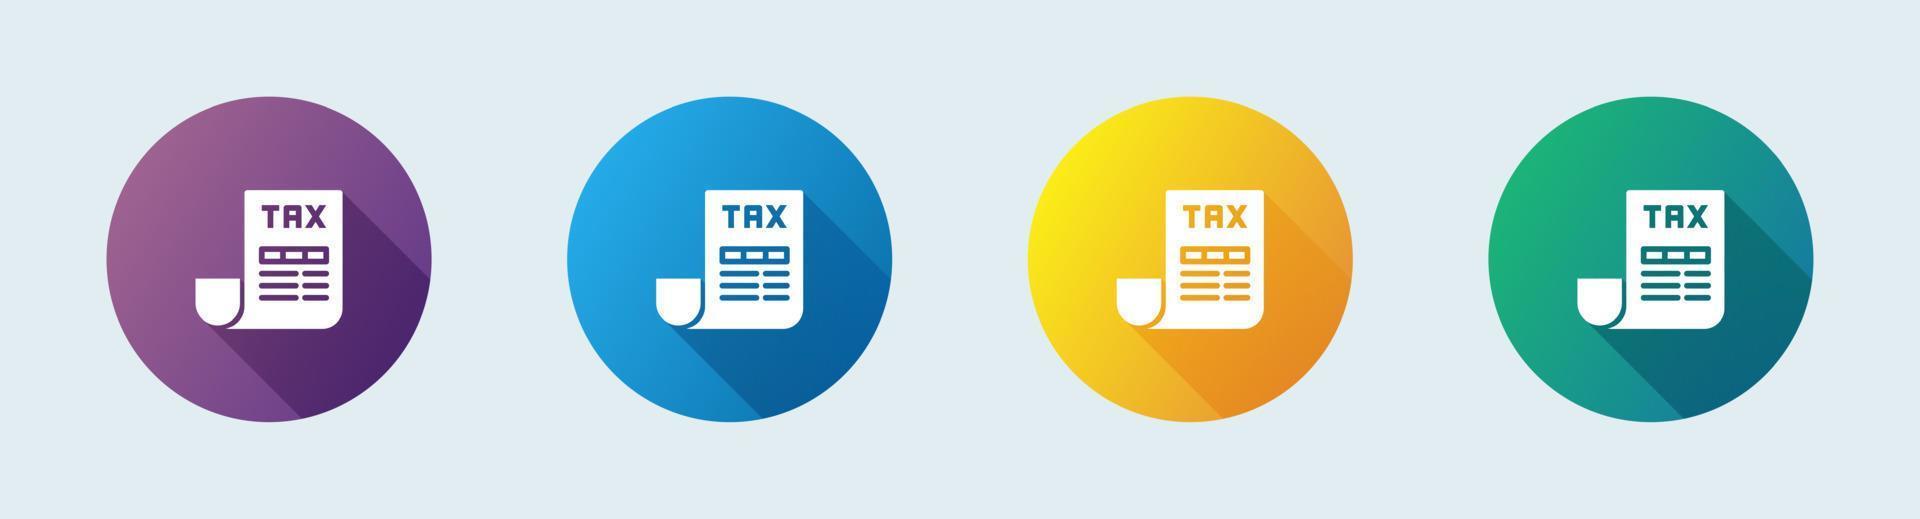 Tax solid icon in flat design style. Finance signs vector illustration.